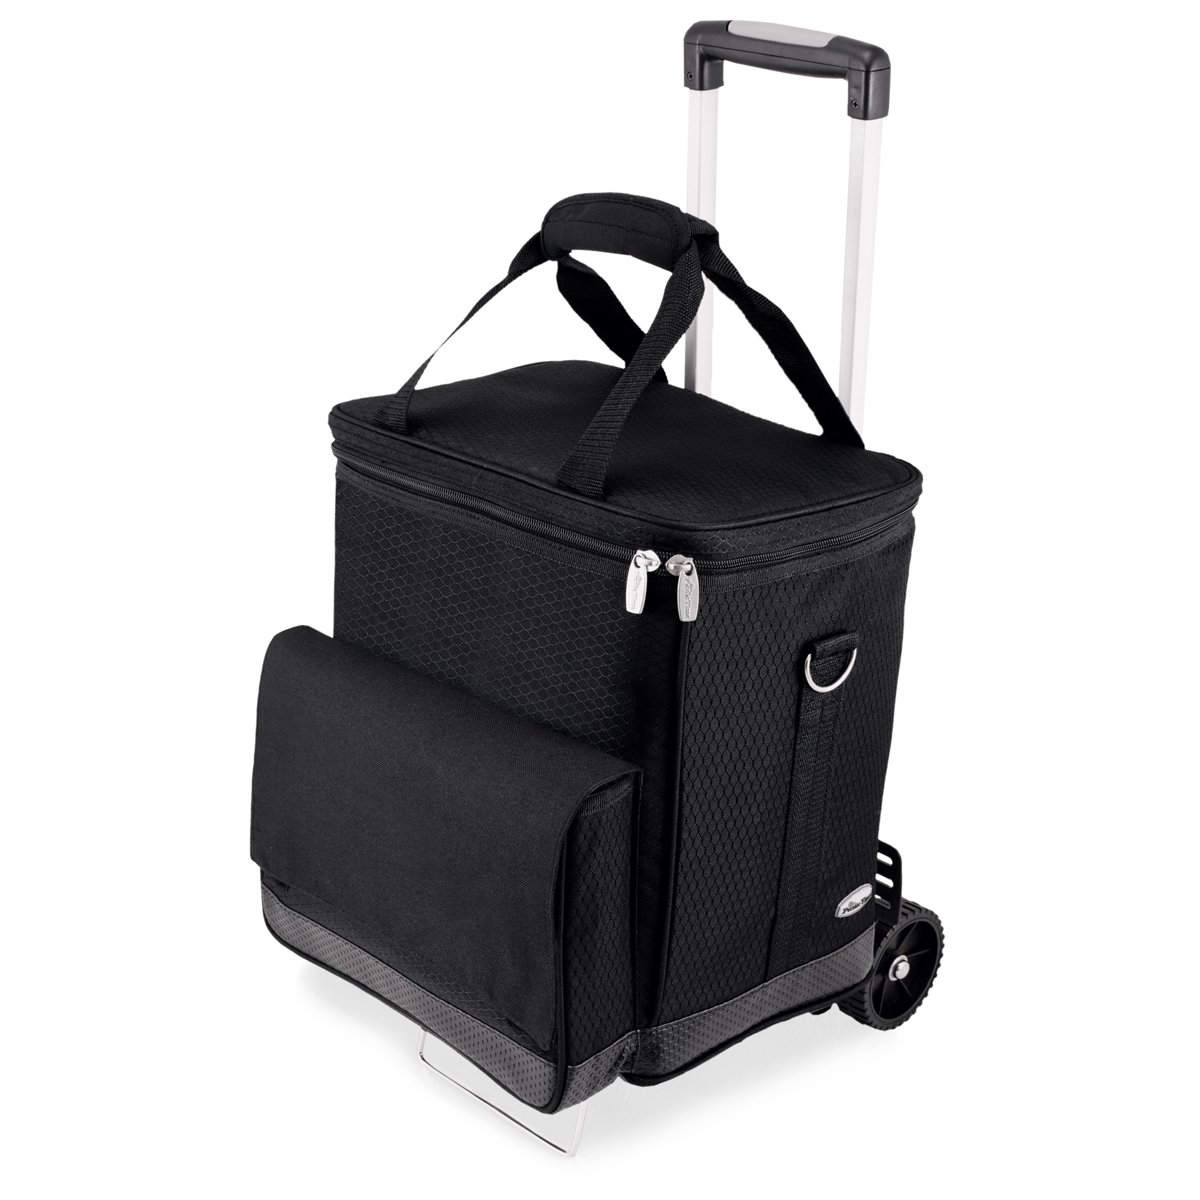 Legacy by Picnic Time Cellar 6-Bottle Wine Carrier & Cooler Tote with Trolley - Black